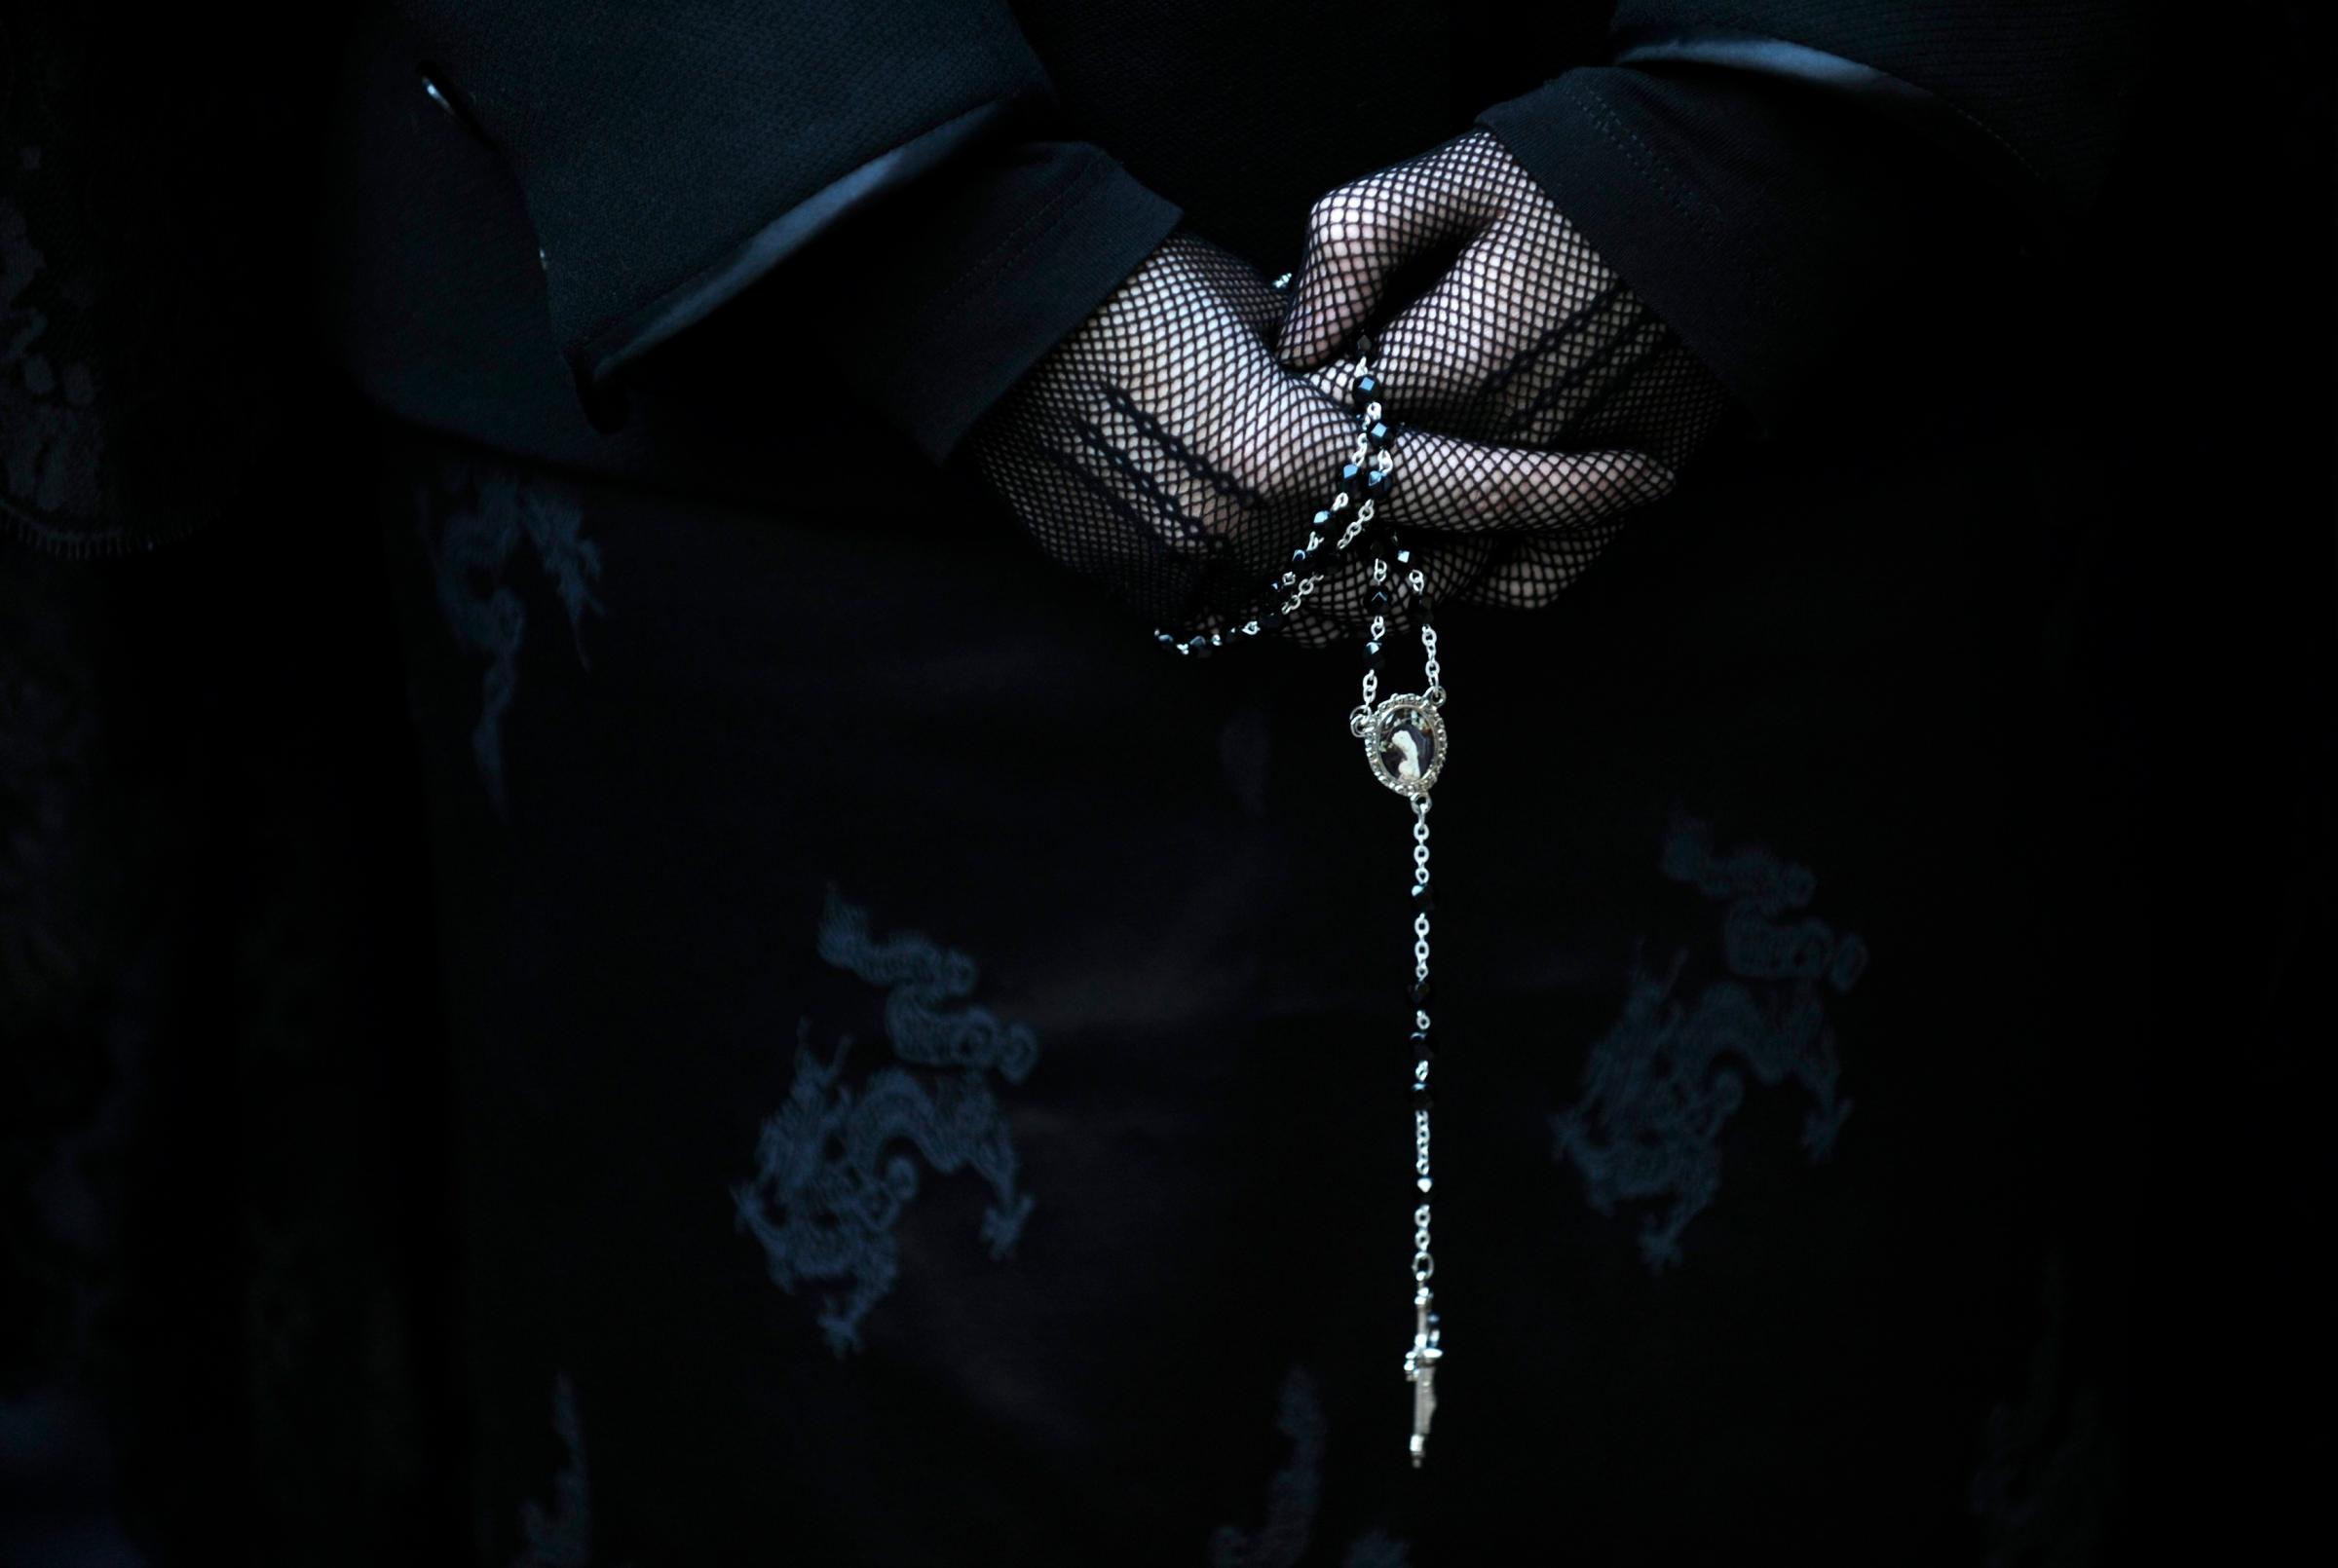 A penitent takes part in the procession of the "Silencio y la Santa Cruz" brotherhood during Holy Week in Oviedo